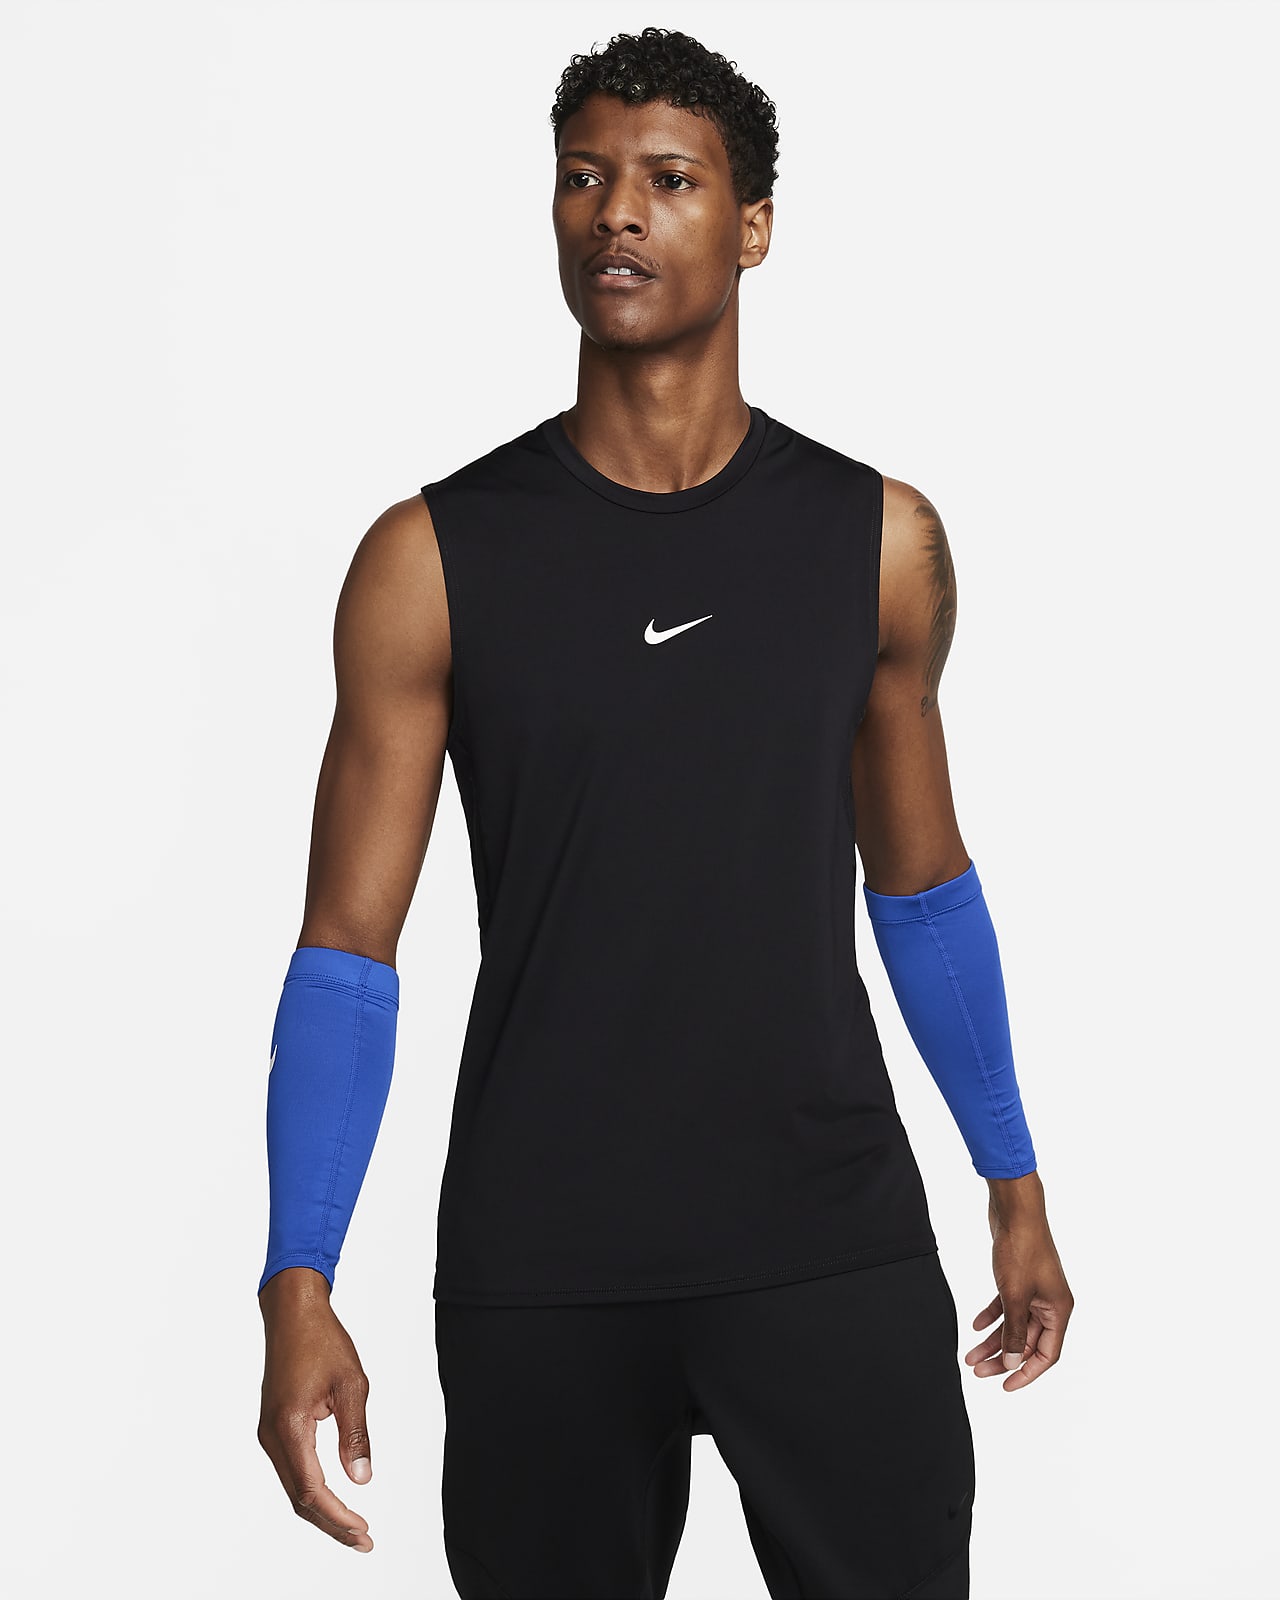 7 Pieces of Protective American Football Gear From Nike to Buy Now. Nike CA